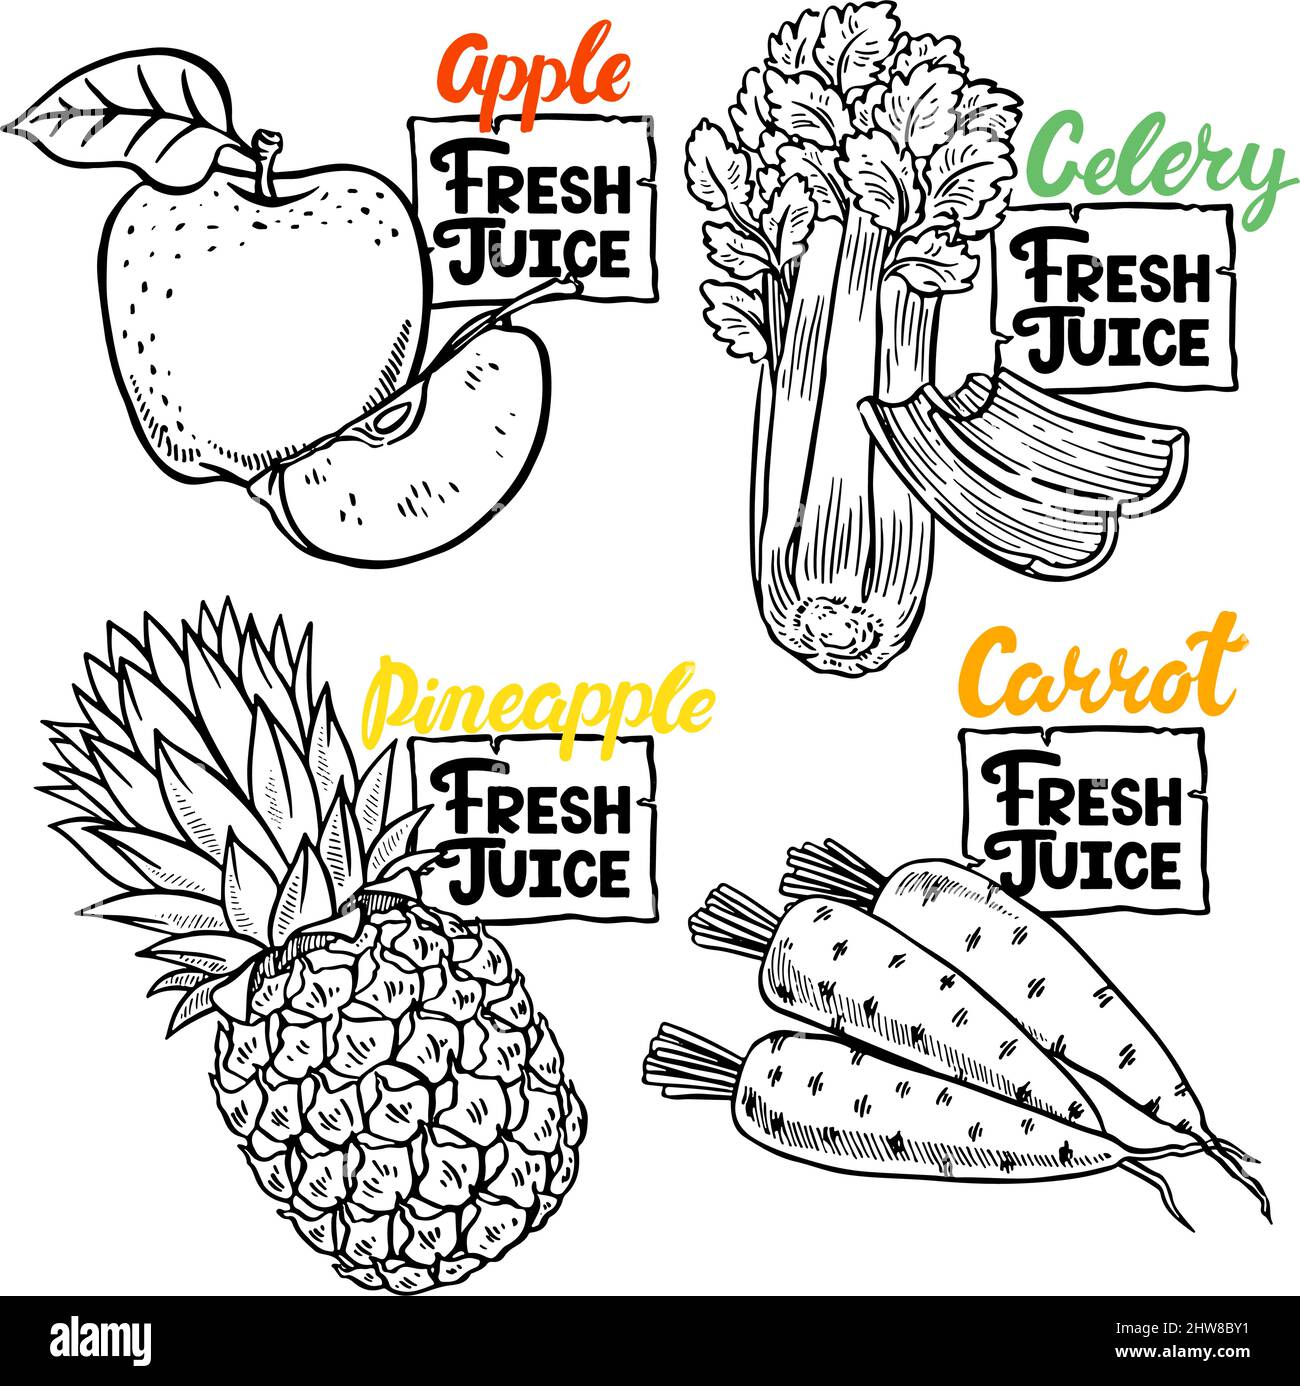 Fresh Juice. beautiful set of sketch vegetables and fruits. hand-drawn illustration Stock Vector